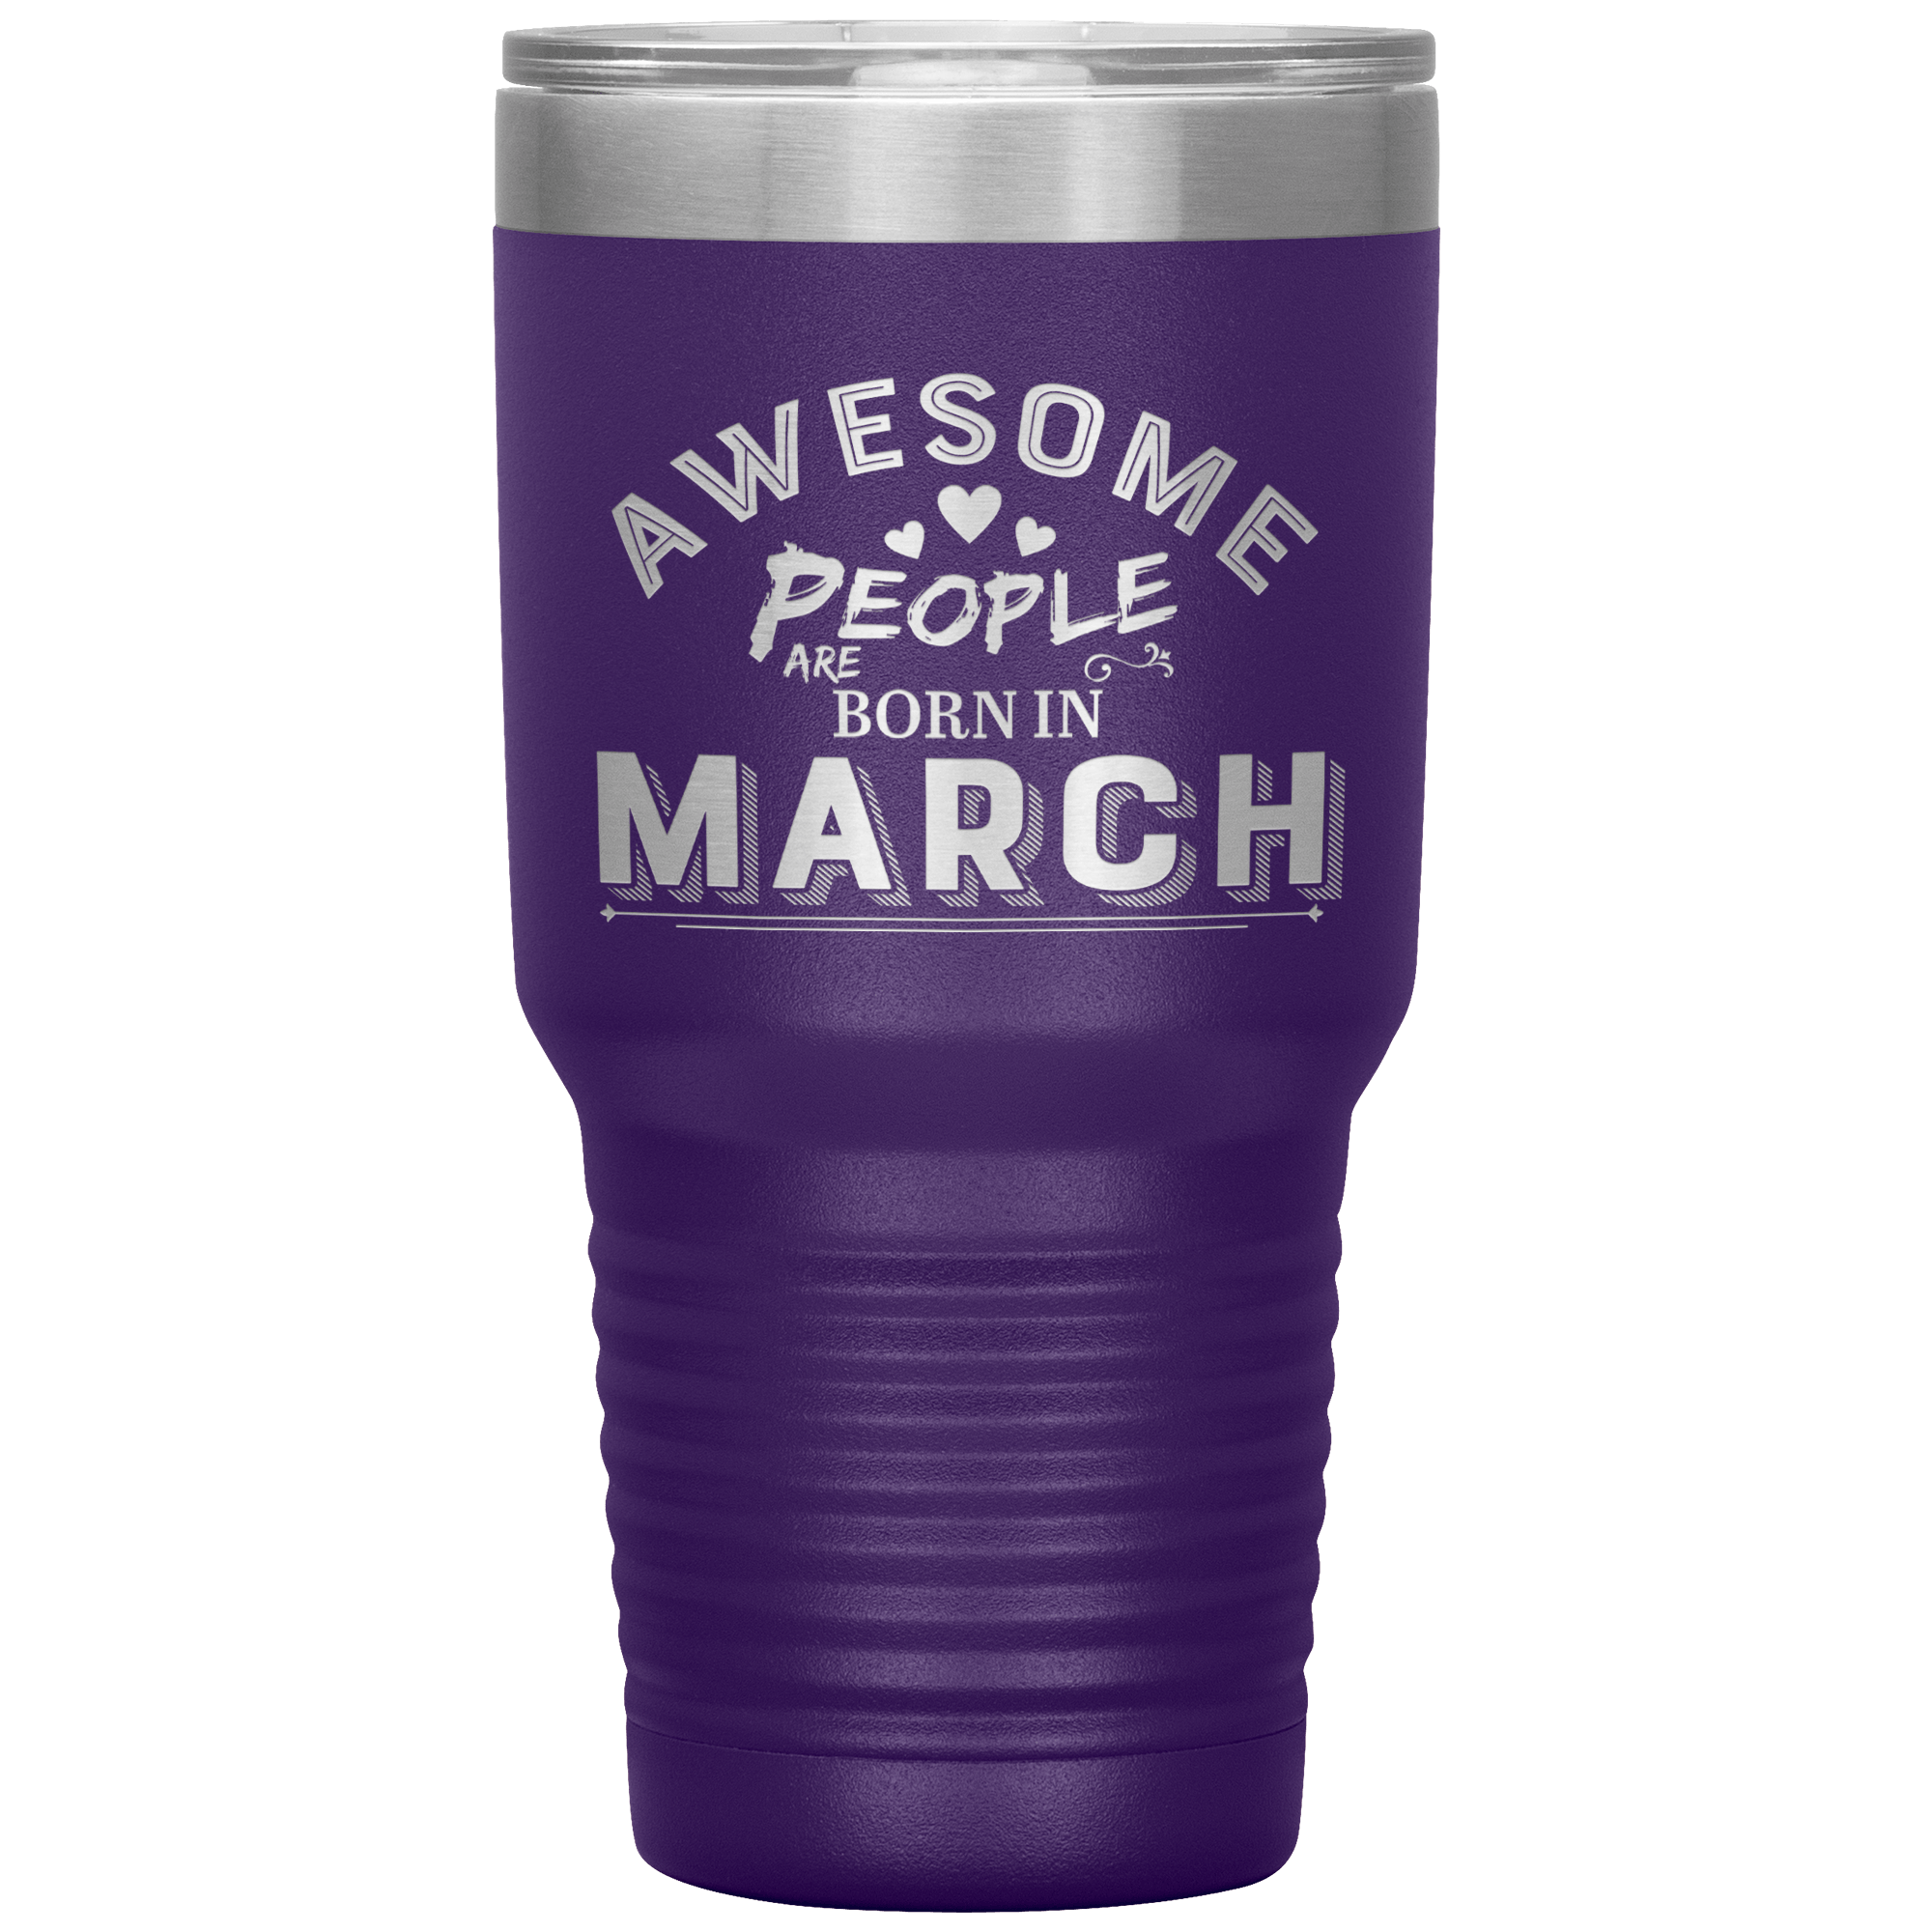 "AWESOME PEOPLE ARE BORN IN MARCH" Tumbler